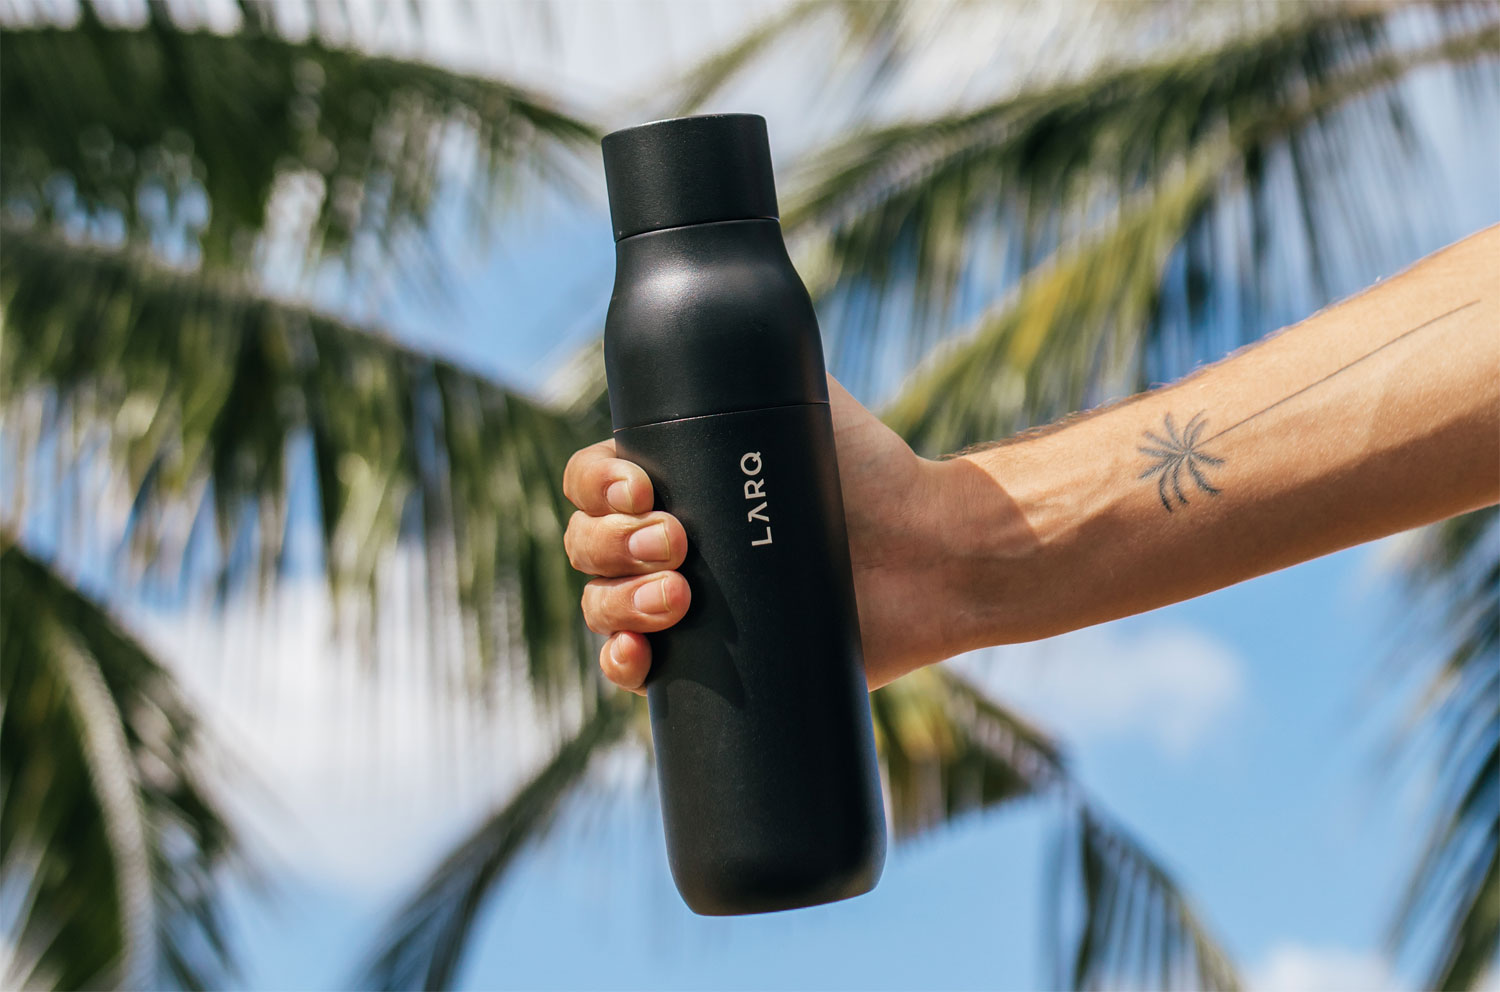 The LARQ Water Bottle Cleans Up Your Nasty Tap Water With UV-C